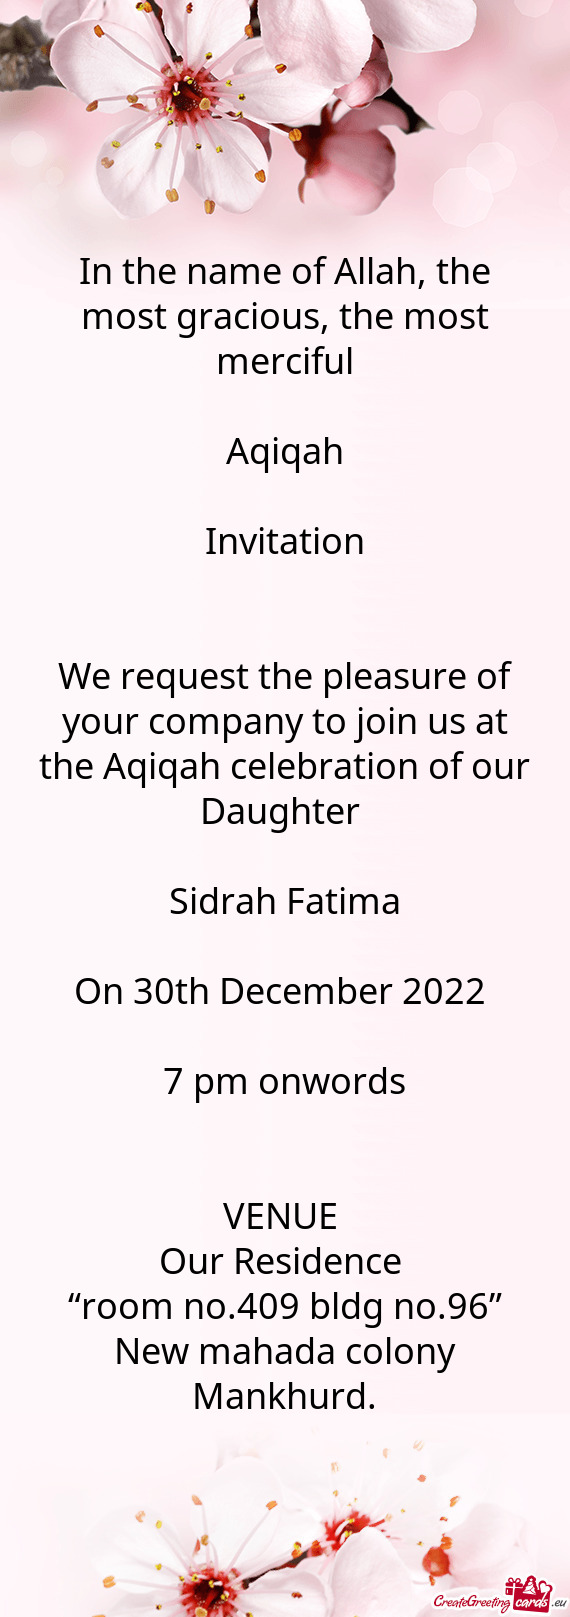 We request the pleasure of your company to join us at the Aqiqah celebration of our Daughter